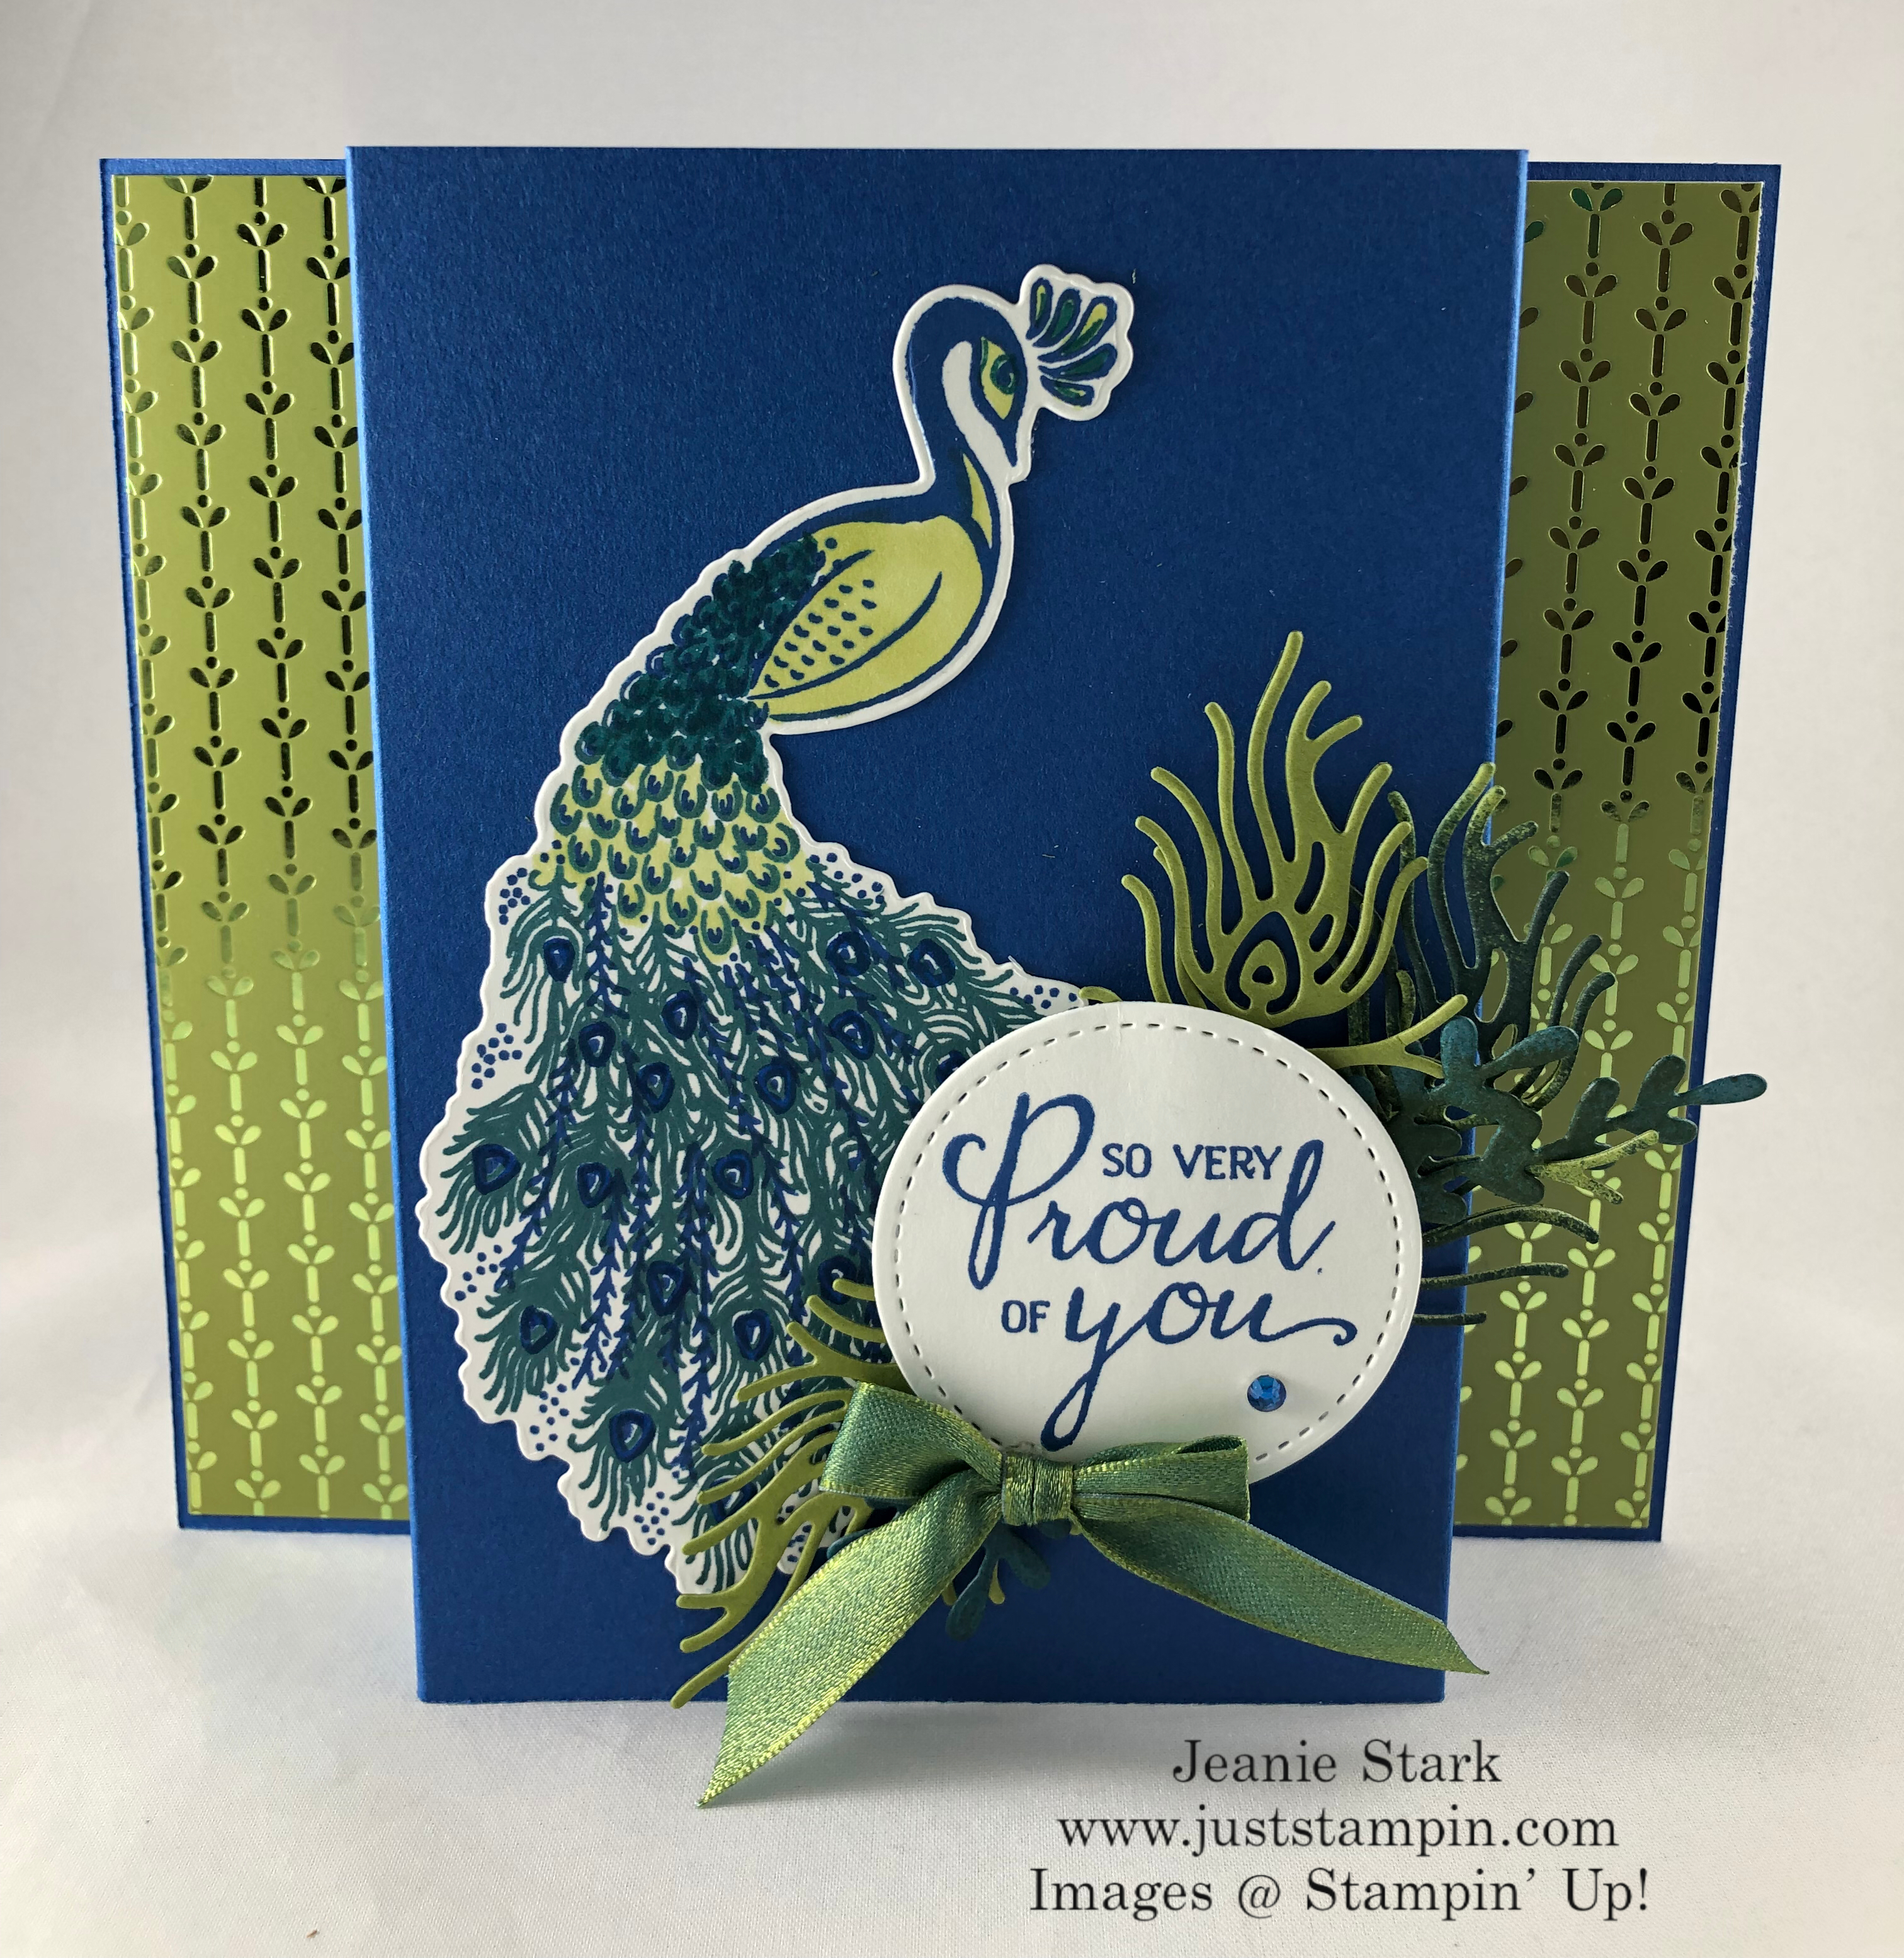 Stampin'Up! Royal Peacock stamp set and Detailed Peacock Dies Uplifting card idea - Jeanie Stark StampinUp